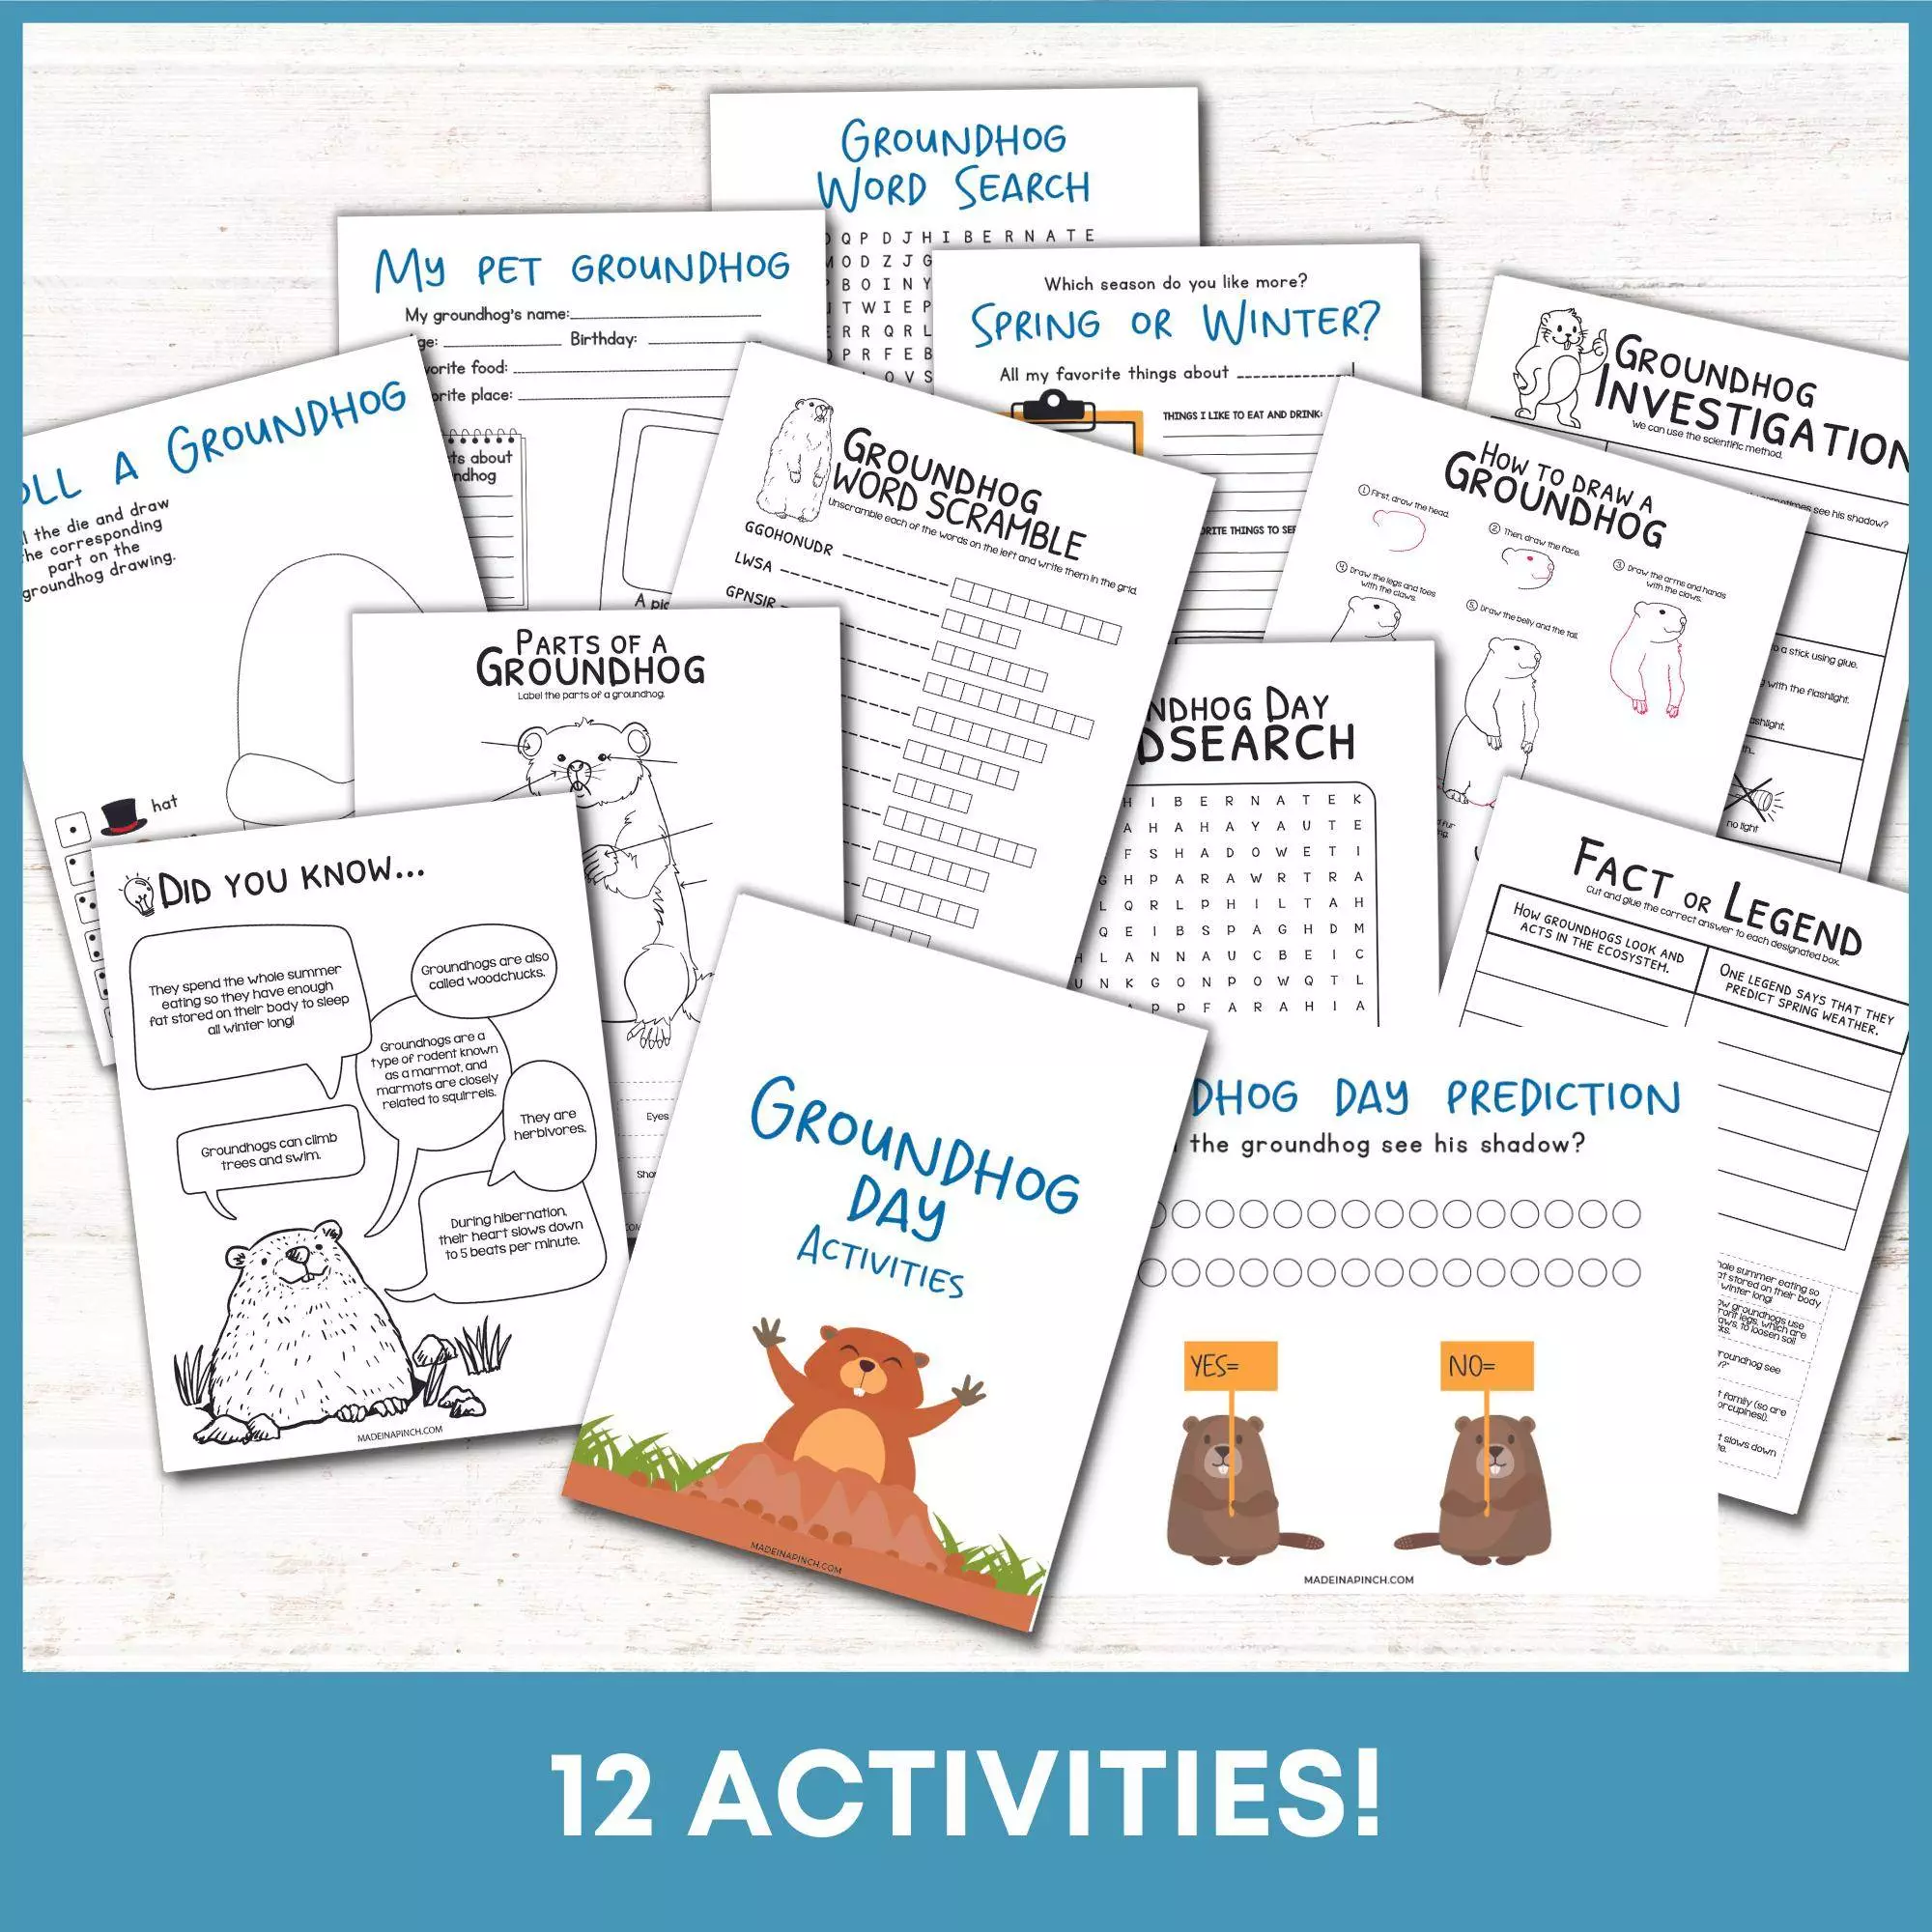 Groundhog Day activities pack square mockup